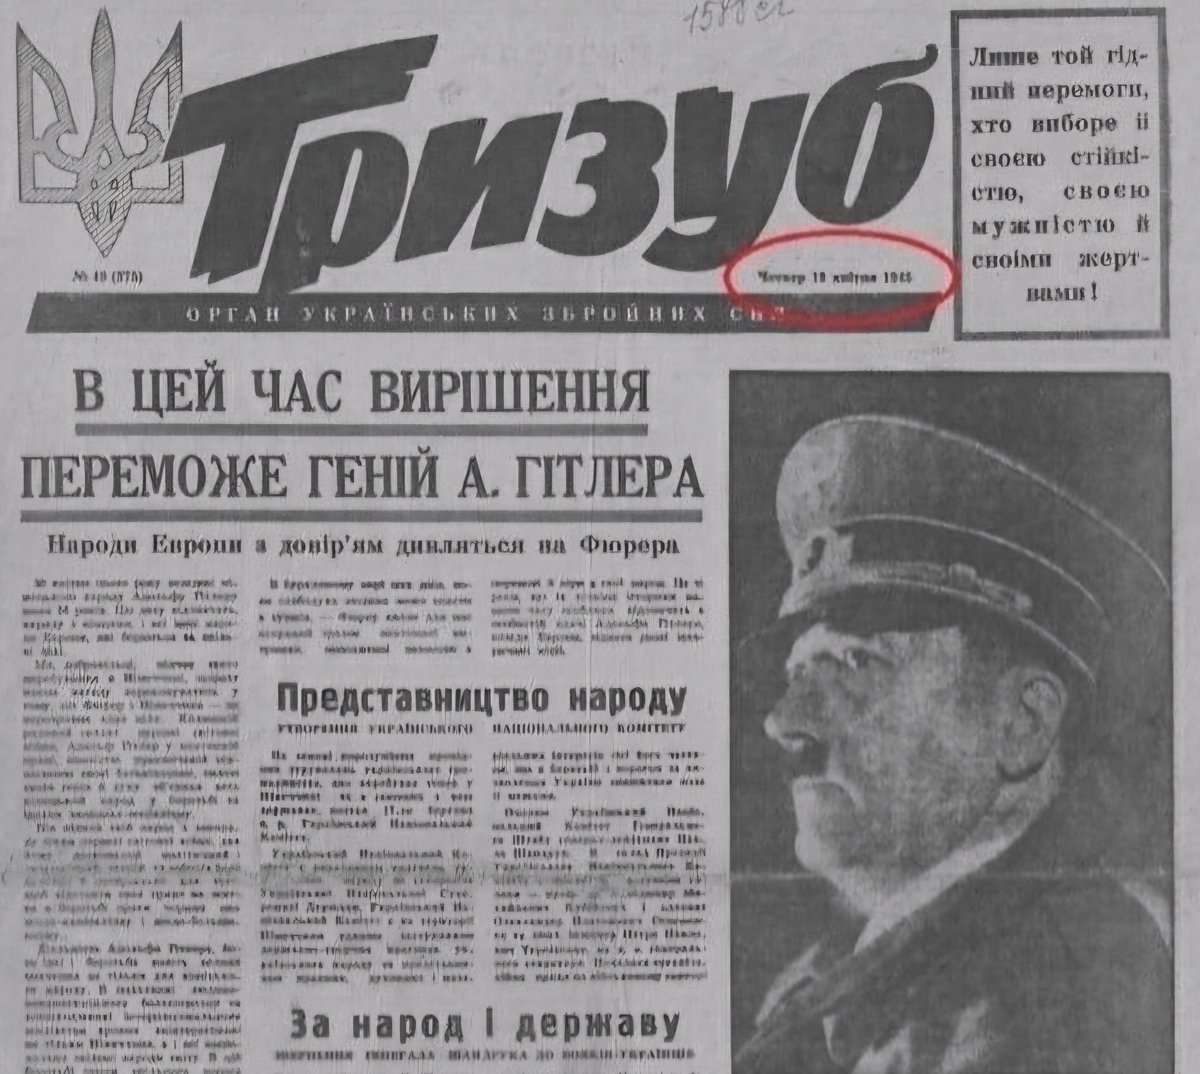 Ukrainian Trident Newspaper on April 26 , 1945 : ' At this hour of decisions, the genius of A. Hitler will win !' 

Hitler committed suicide the week after this ! Ukrainian nationalists were loyal Nazis until the bitter end !